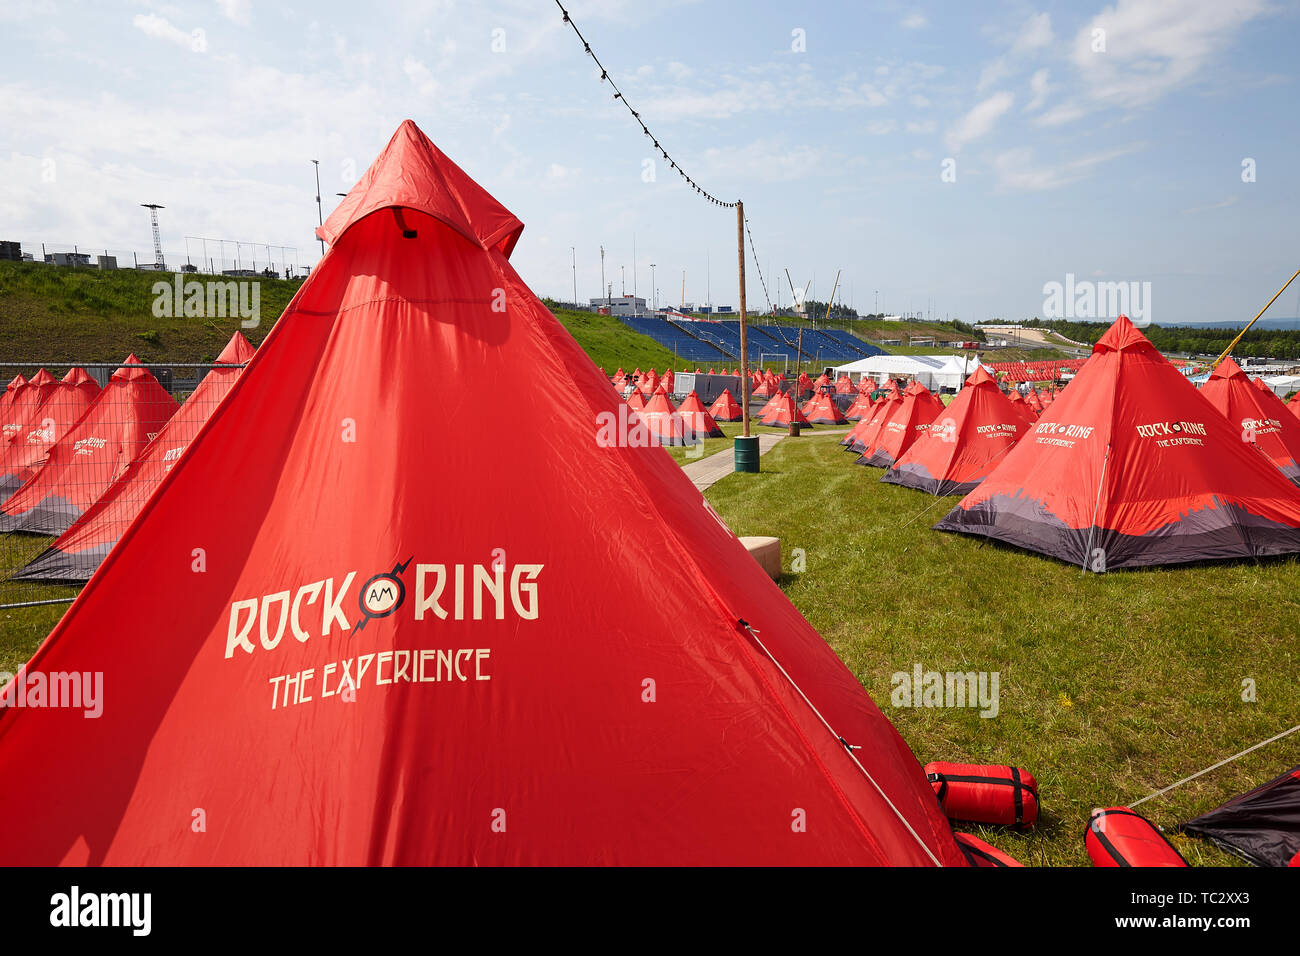 04 June 2019, Rhineland-Palatinate, Nürburg: The construction of the tents  for the music festival "Rock am Ring" at the race track in the Eifel has  begun. The three-day music programme begins on